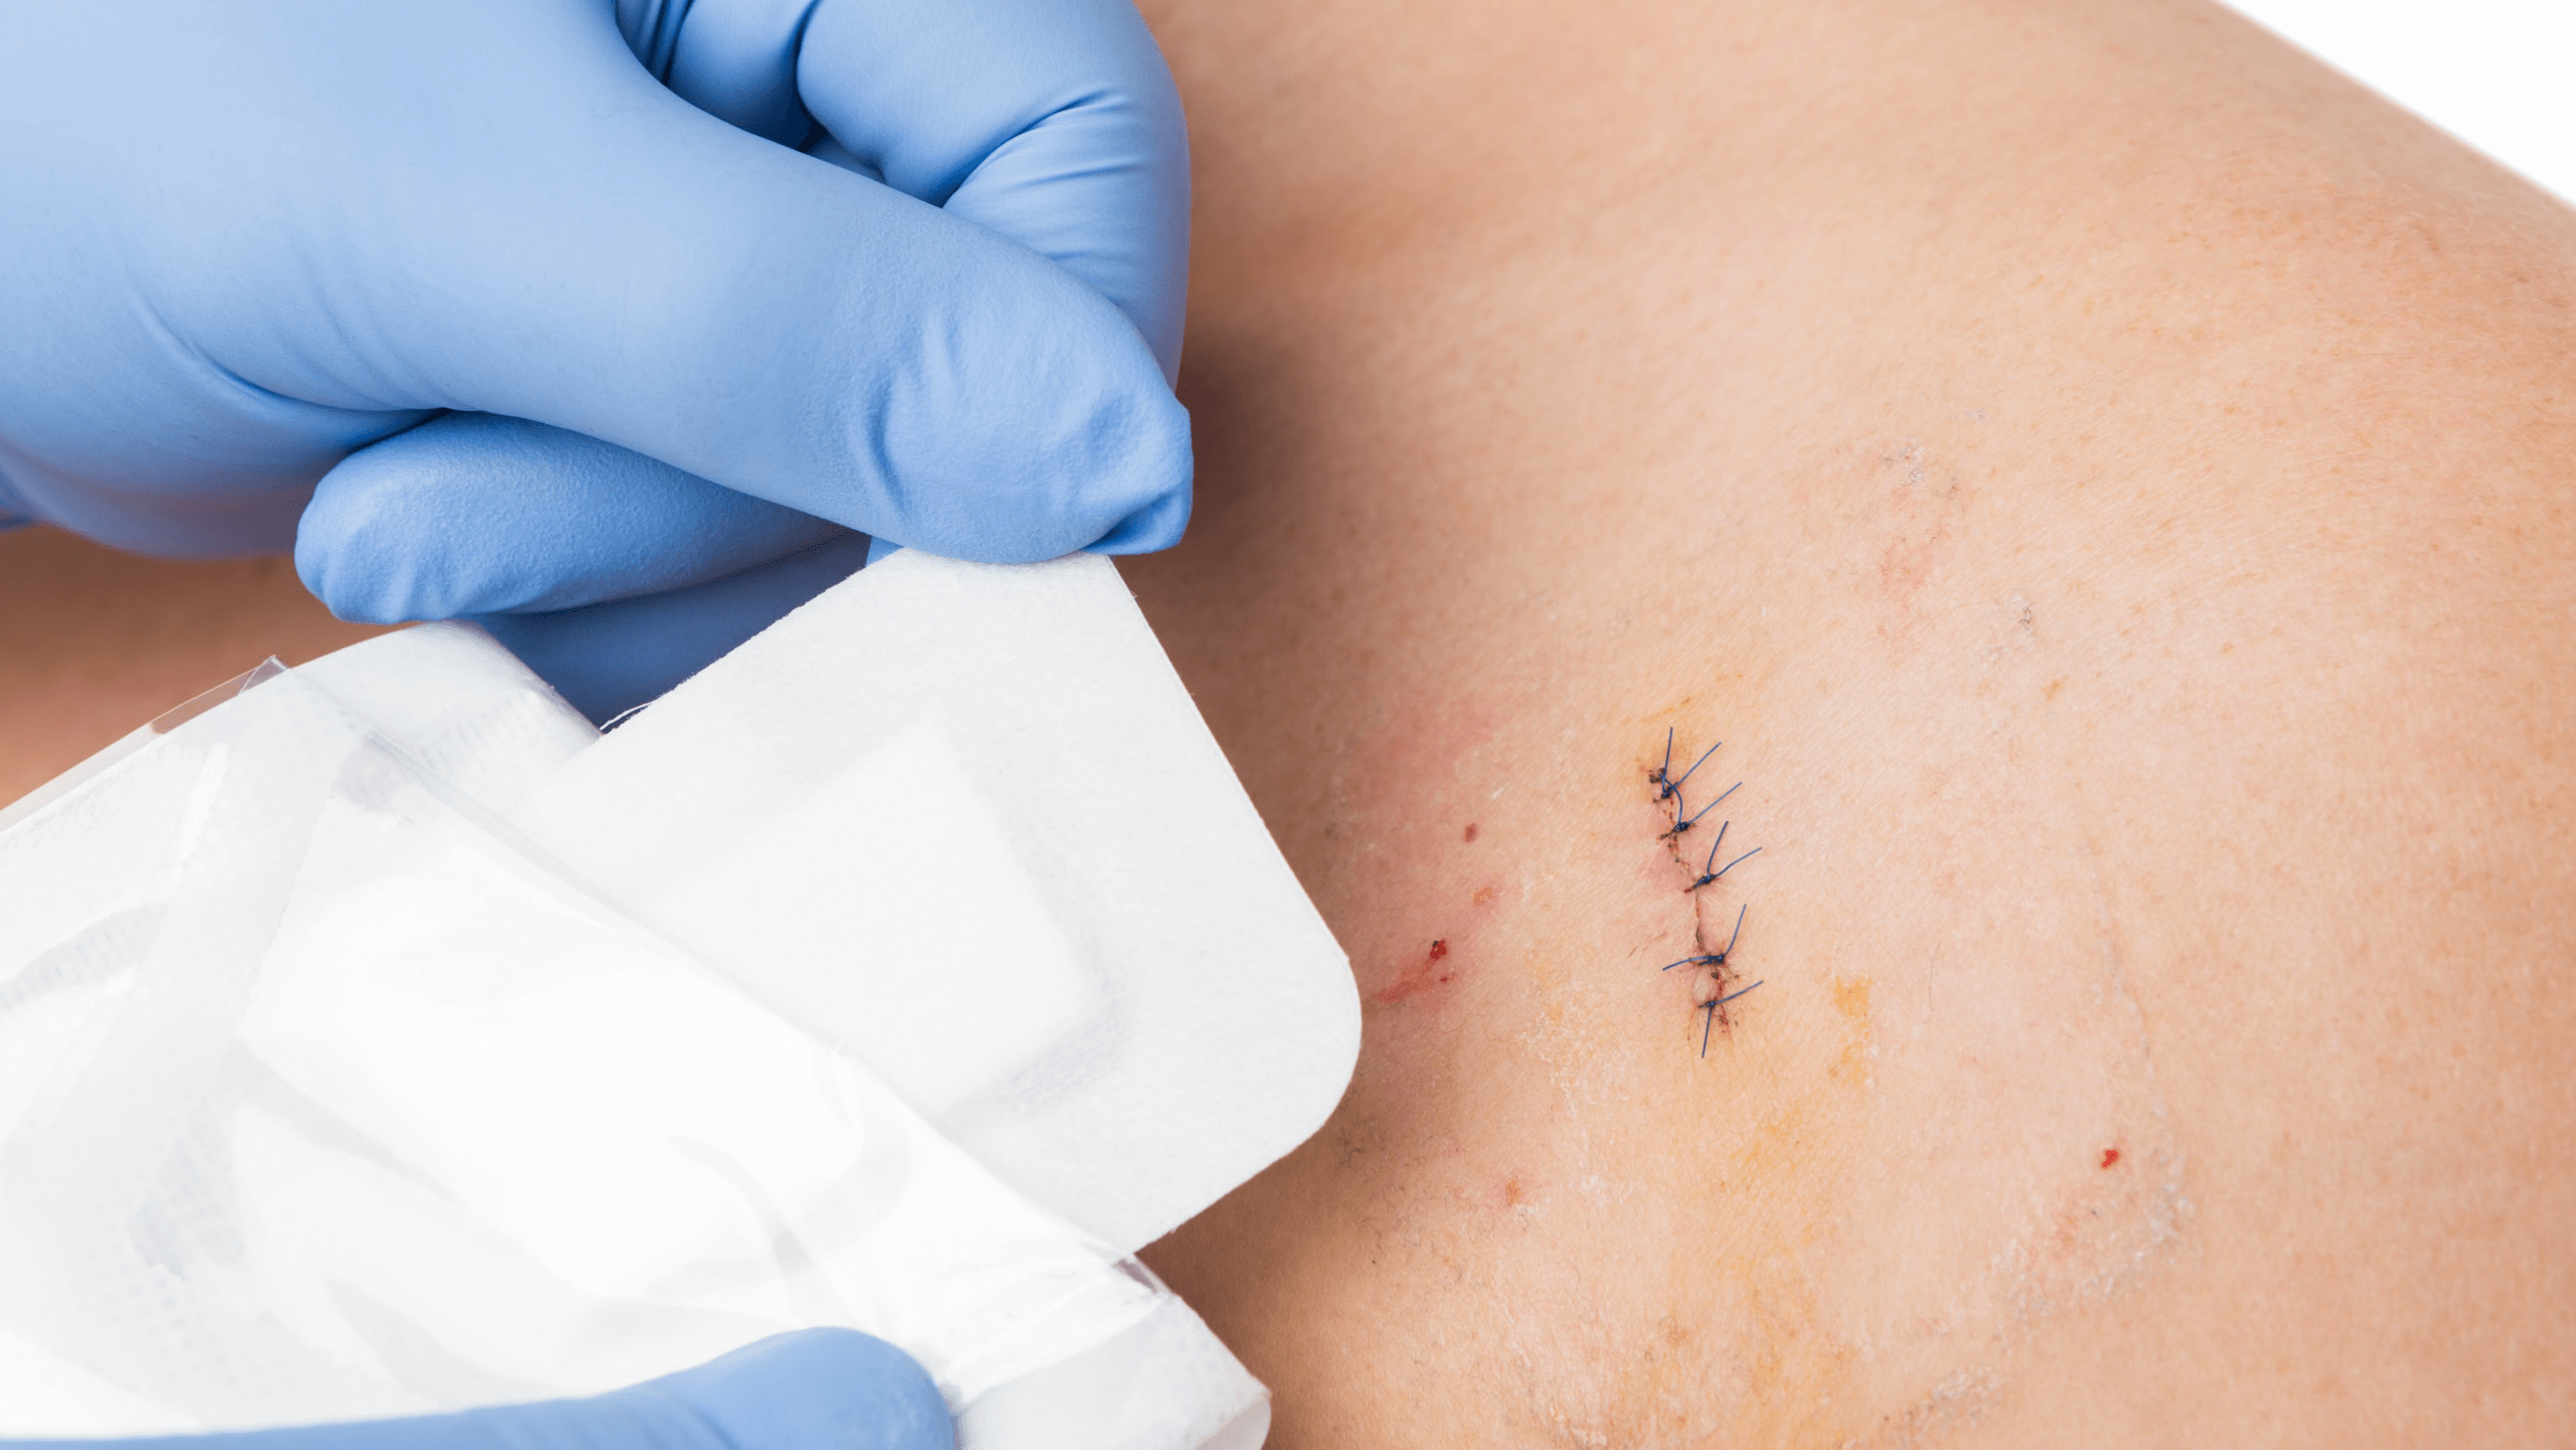 Knowing When a Cut Needs Stitches: Casa de Salud: Primary Care Physicians